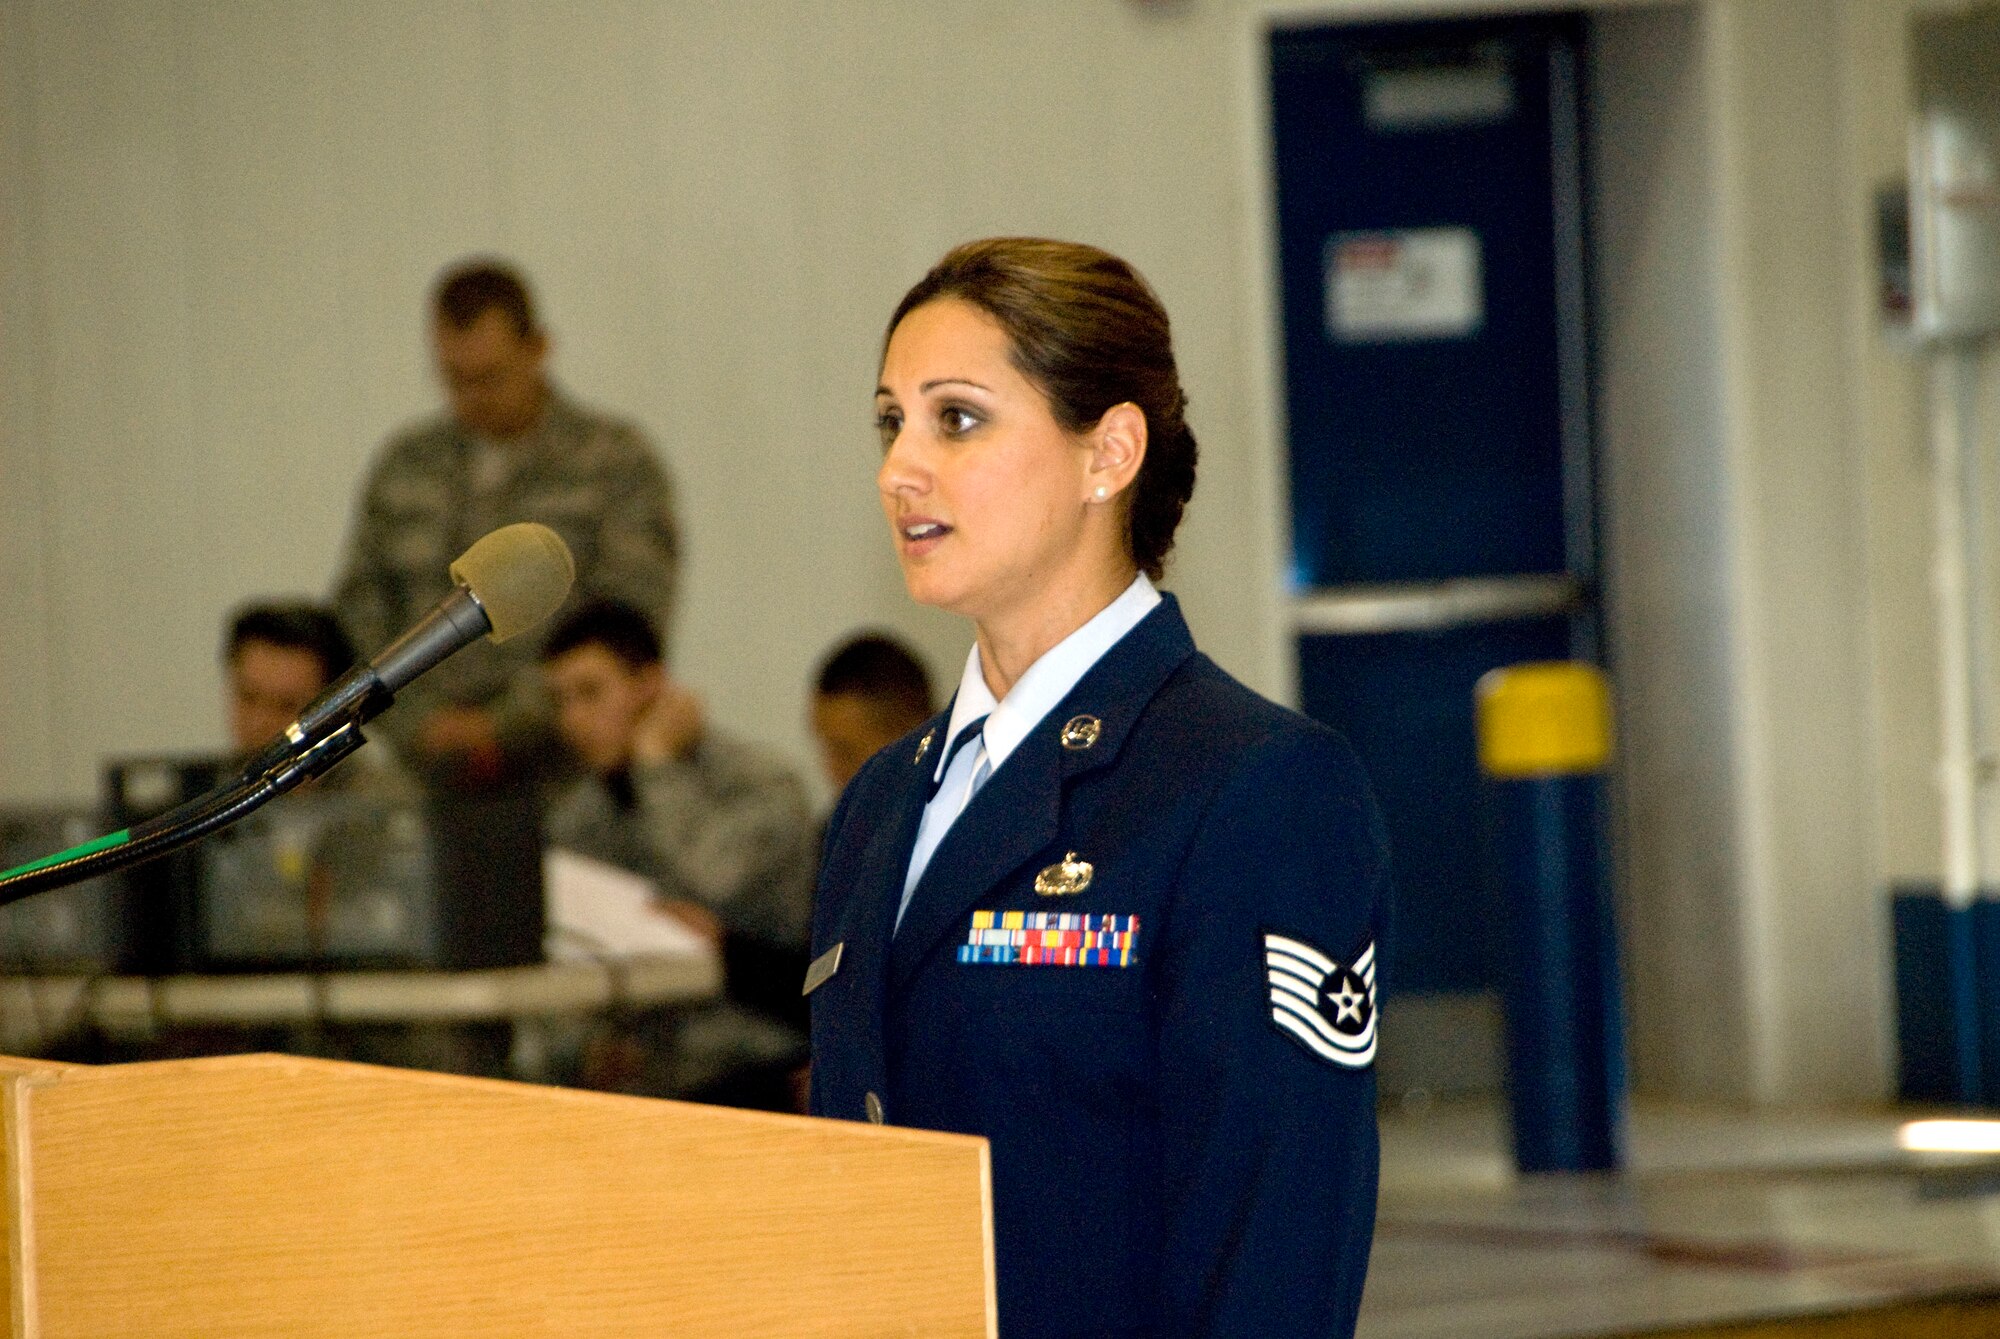 Tech. Sgt. Chandra Smith sing’s ‘Amazing Grace’ at the 162nd Fighter Wing’s assumption of command ceremony in honor of the victims involved in the Jan. 8 shooting in Tucson, Ariz. (U.S. Air Force photo/Master Sgt. Dave Neve)